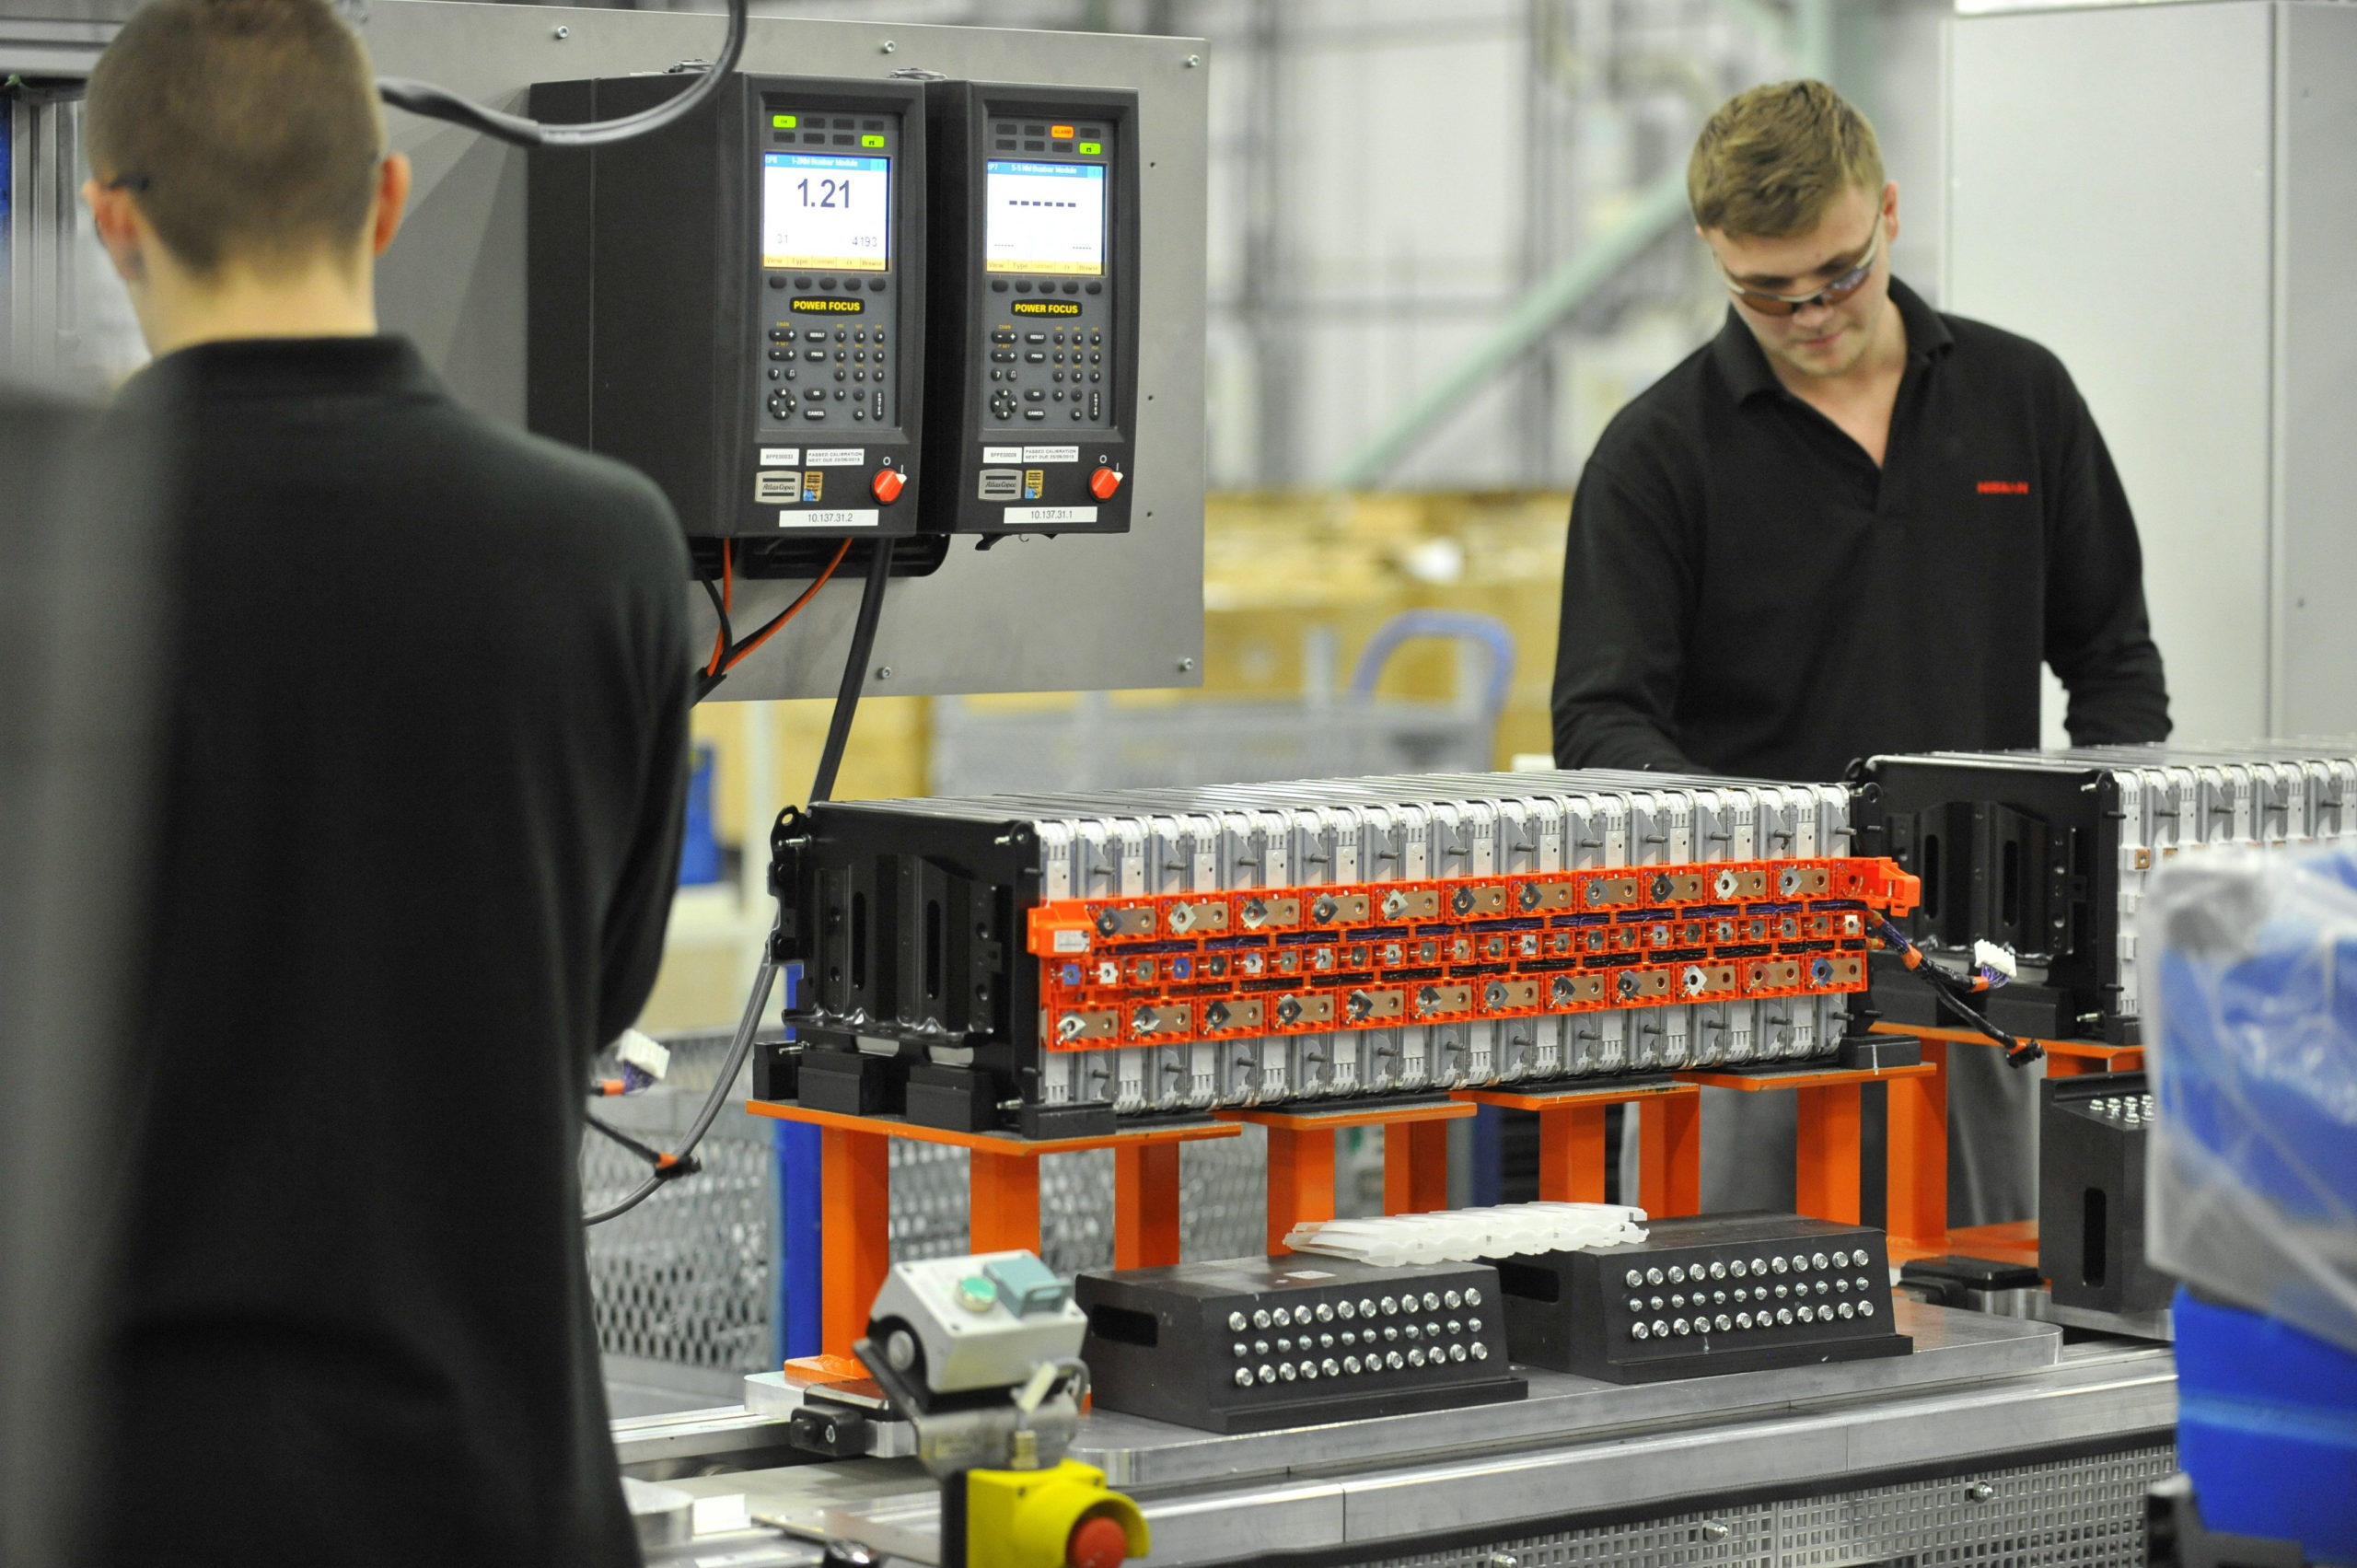 SMMT calls for battery gigafactories to boost UK’s competitiveness